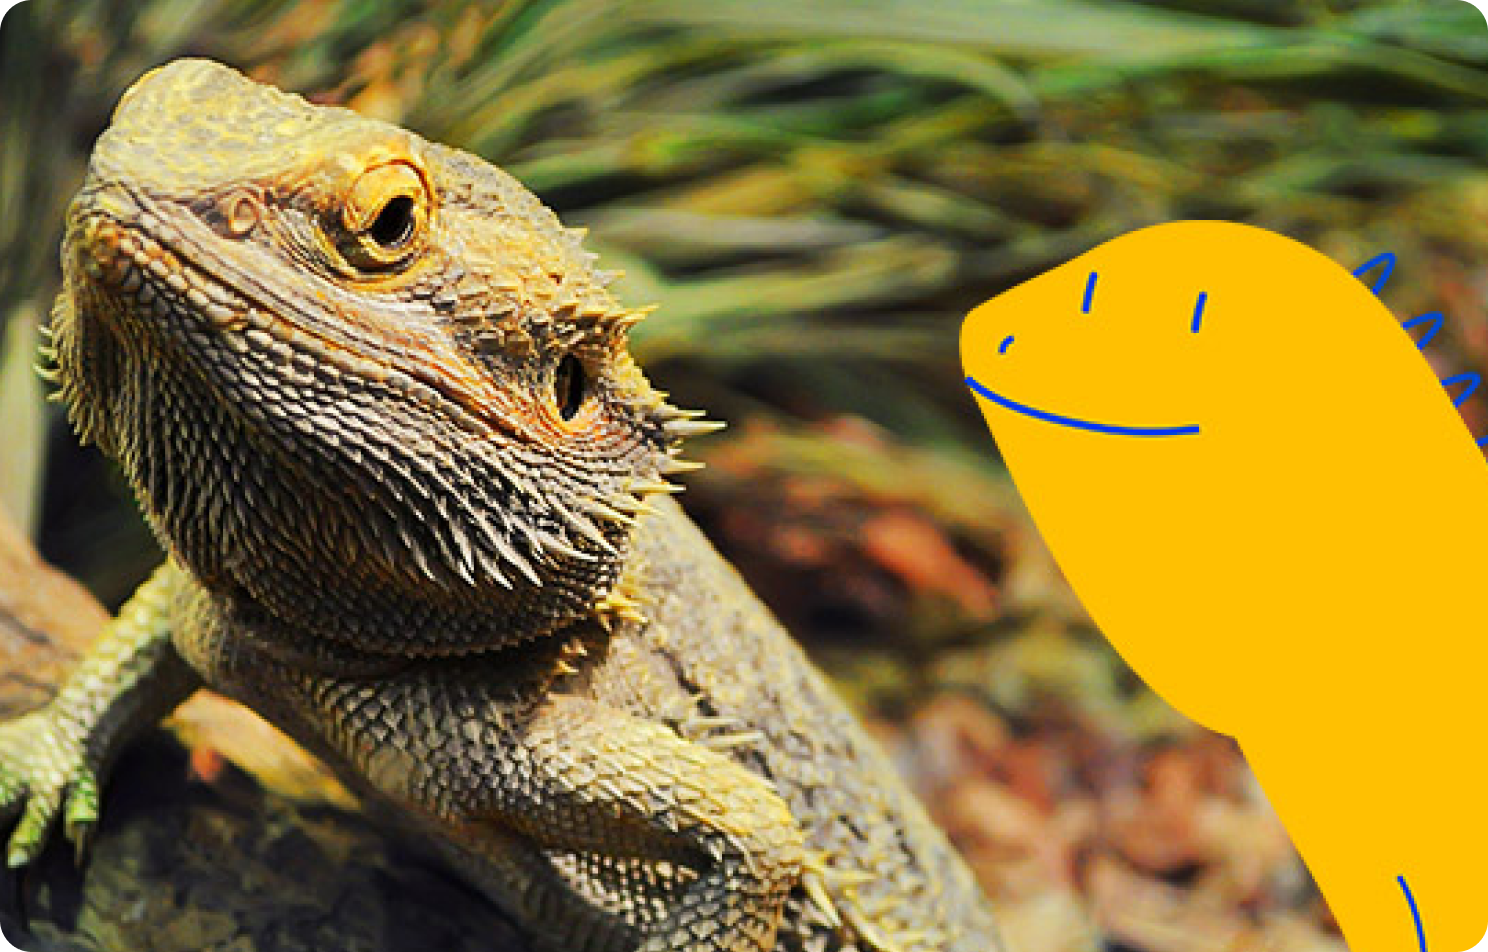 Caring For Your Pet Bearded Dragon